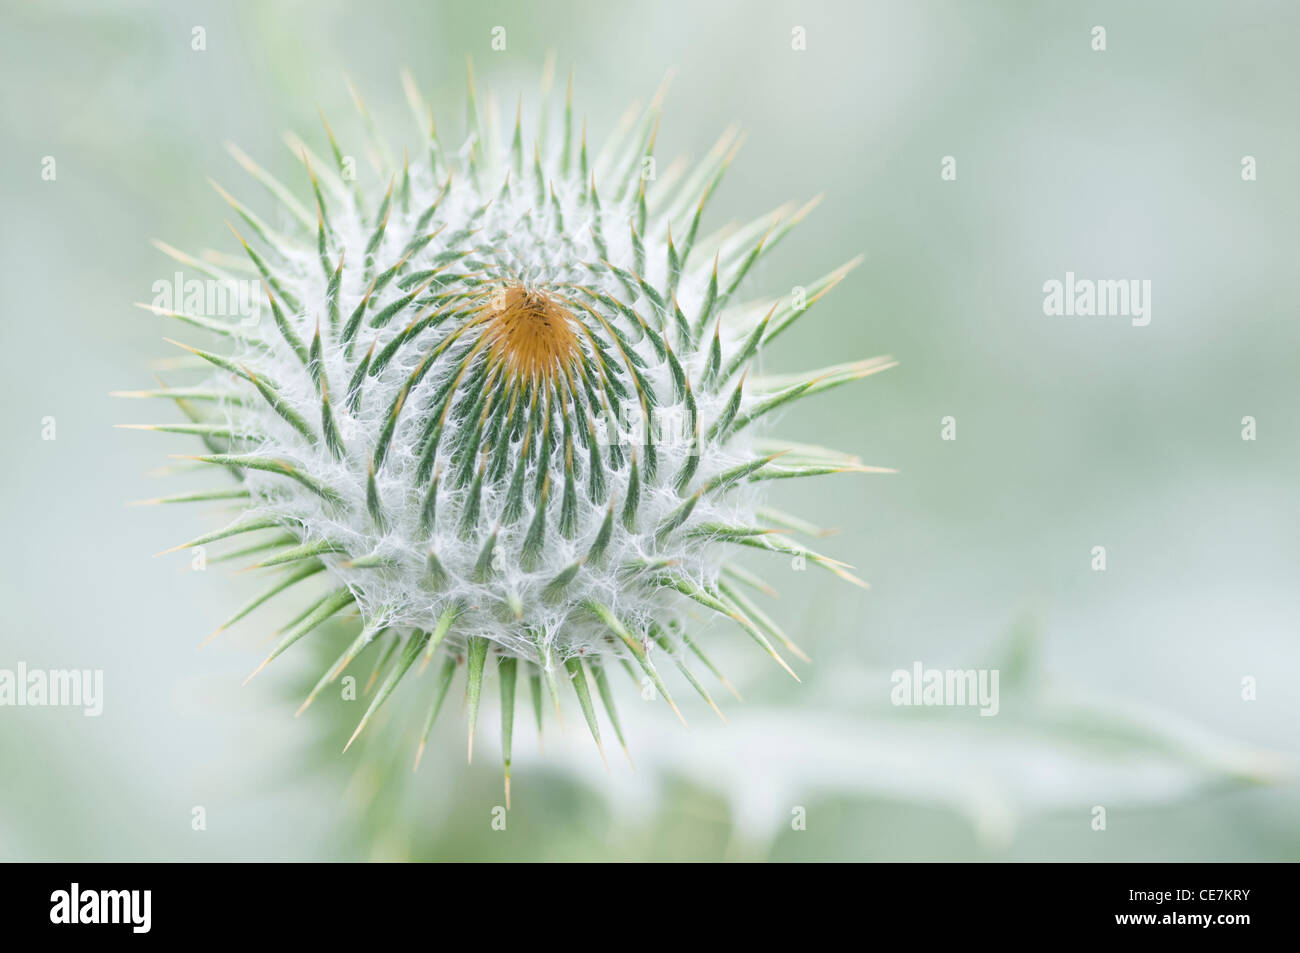 Spiky flower head of Onopordum acanthium, Scotch or Cotton thistle against a green background. Stock Photo